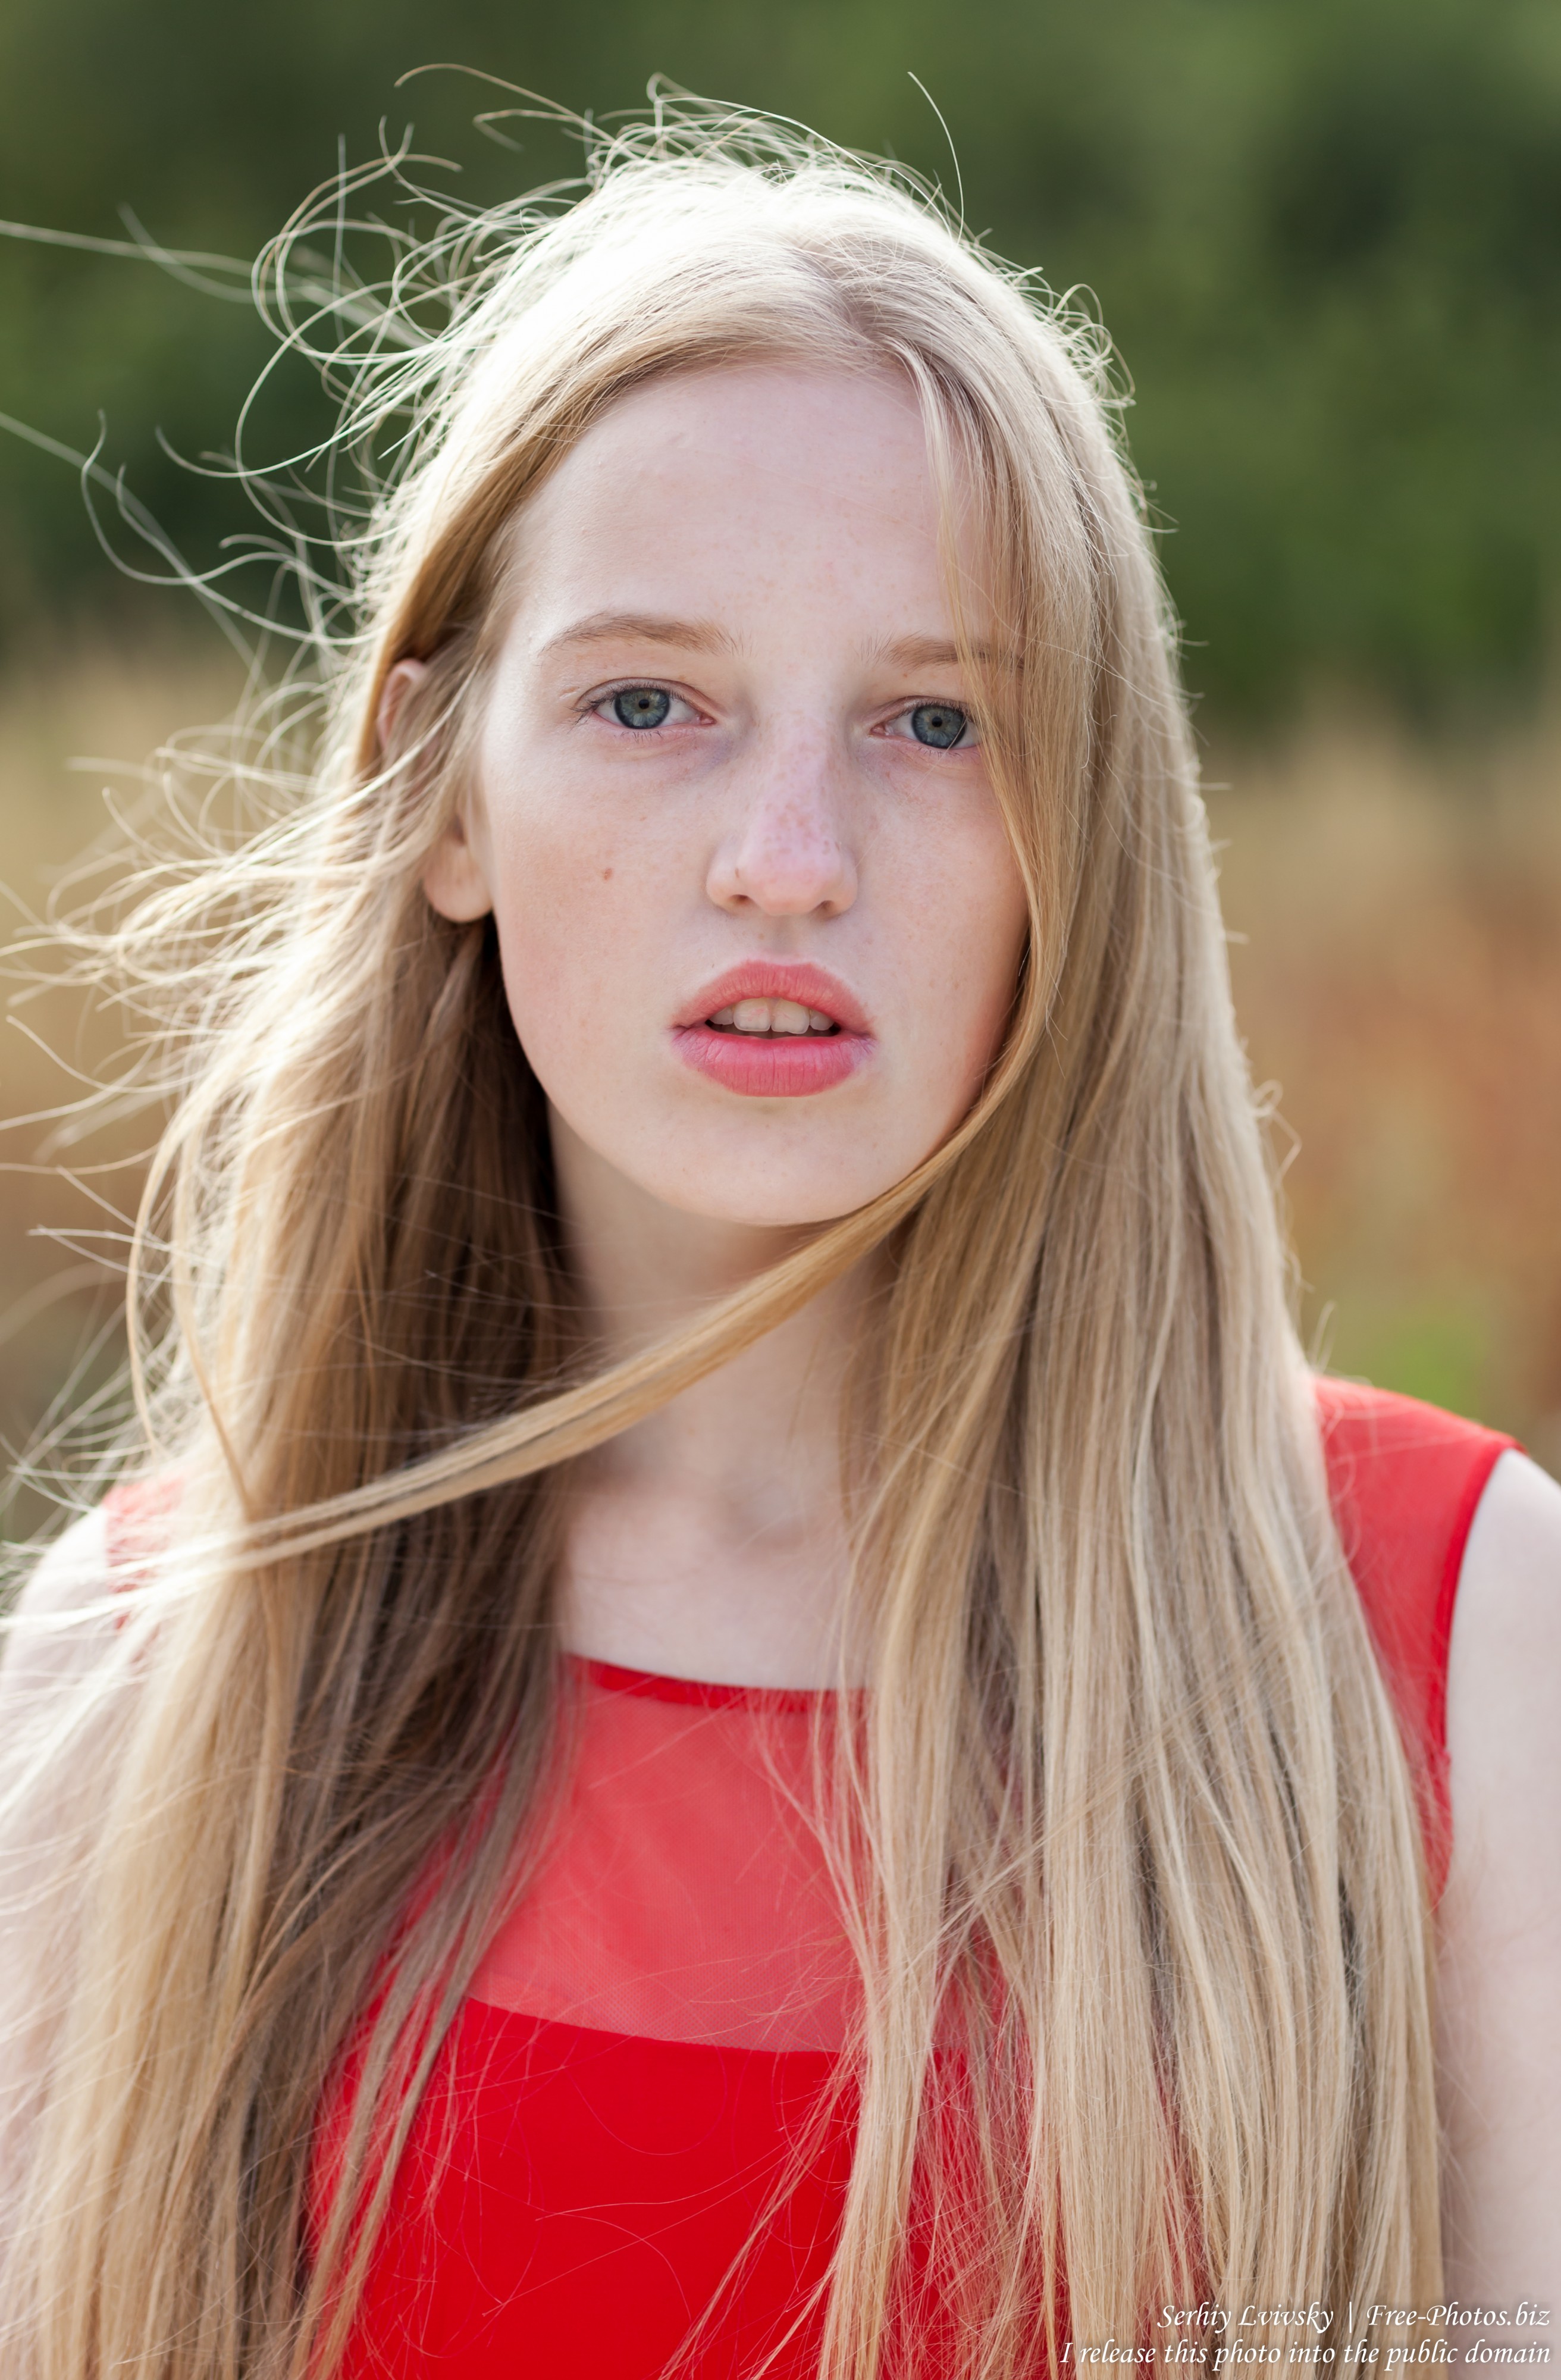 a 17-year-old Catholic natural blond girl photographed in September 2016 by Serhiy Lvivsky, picture 20